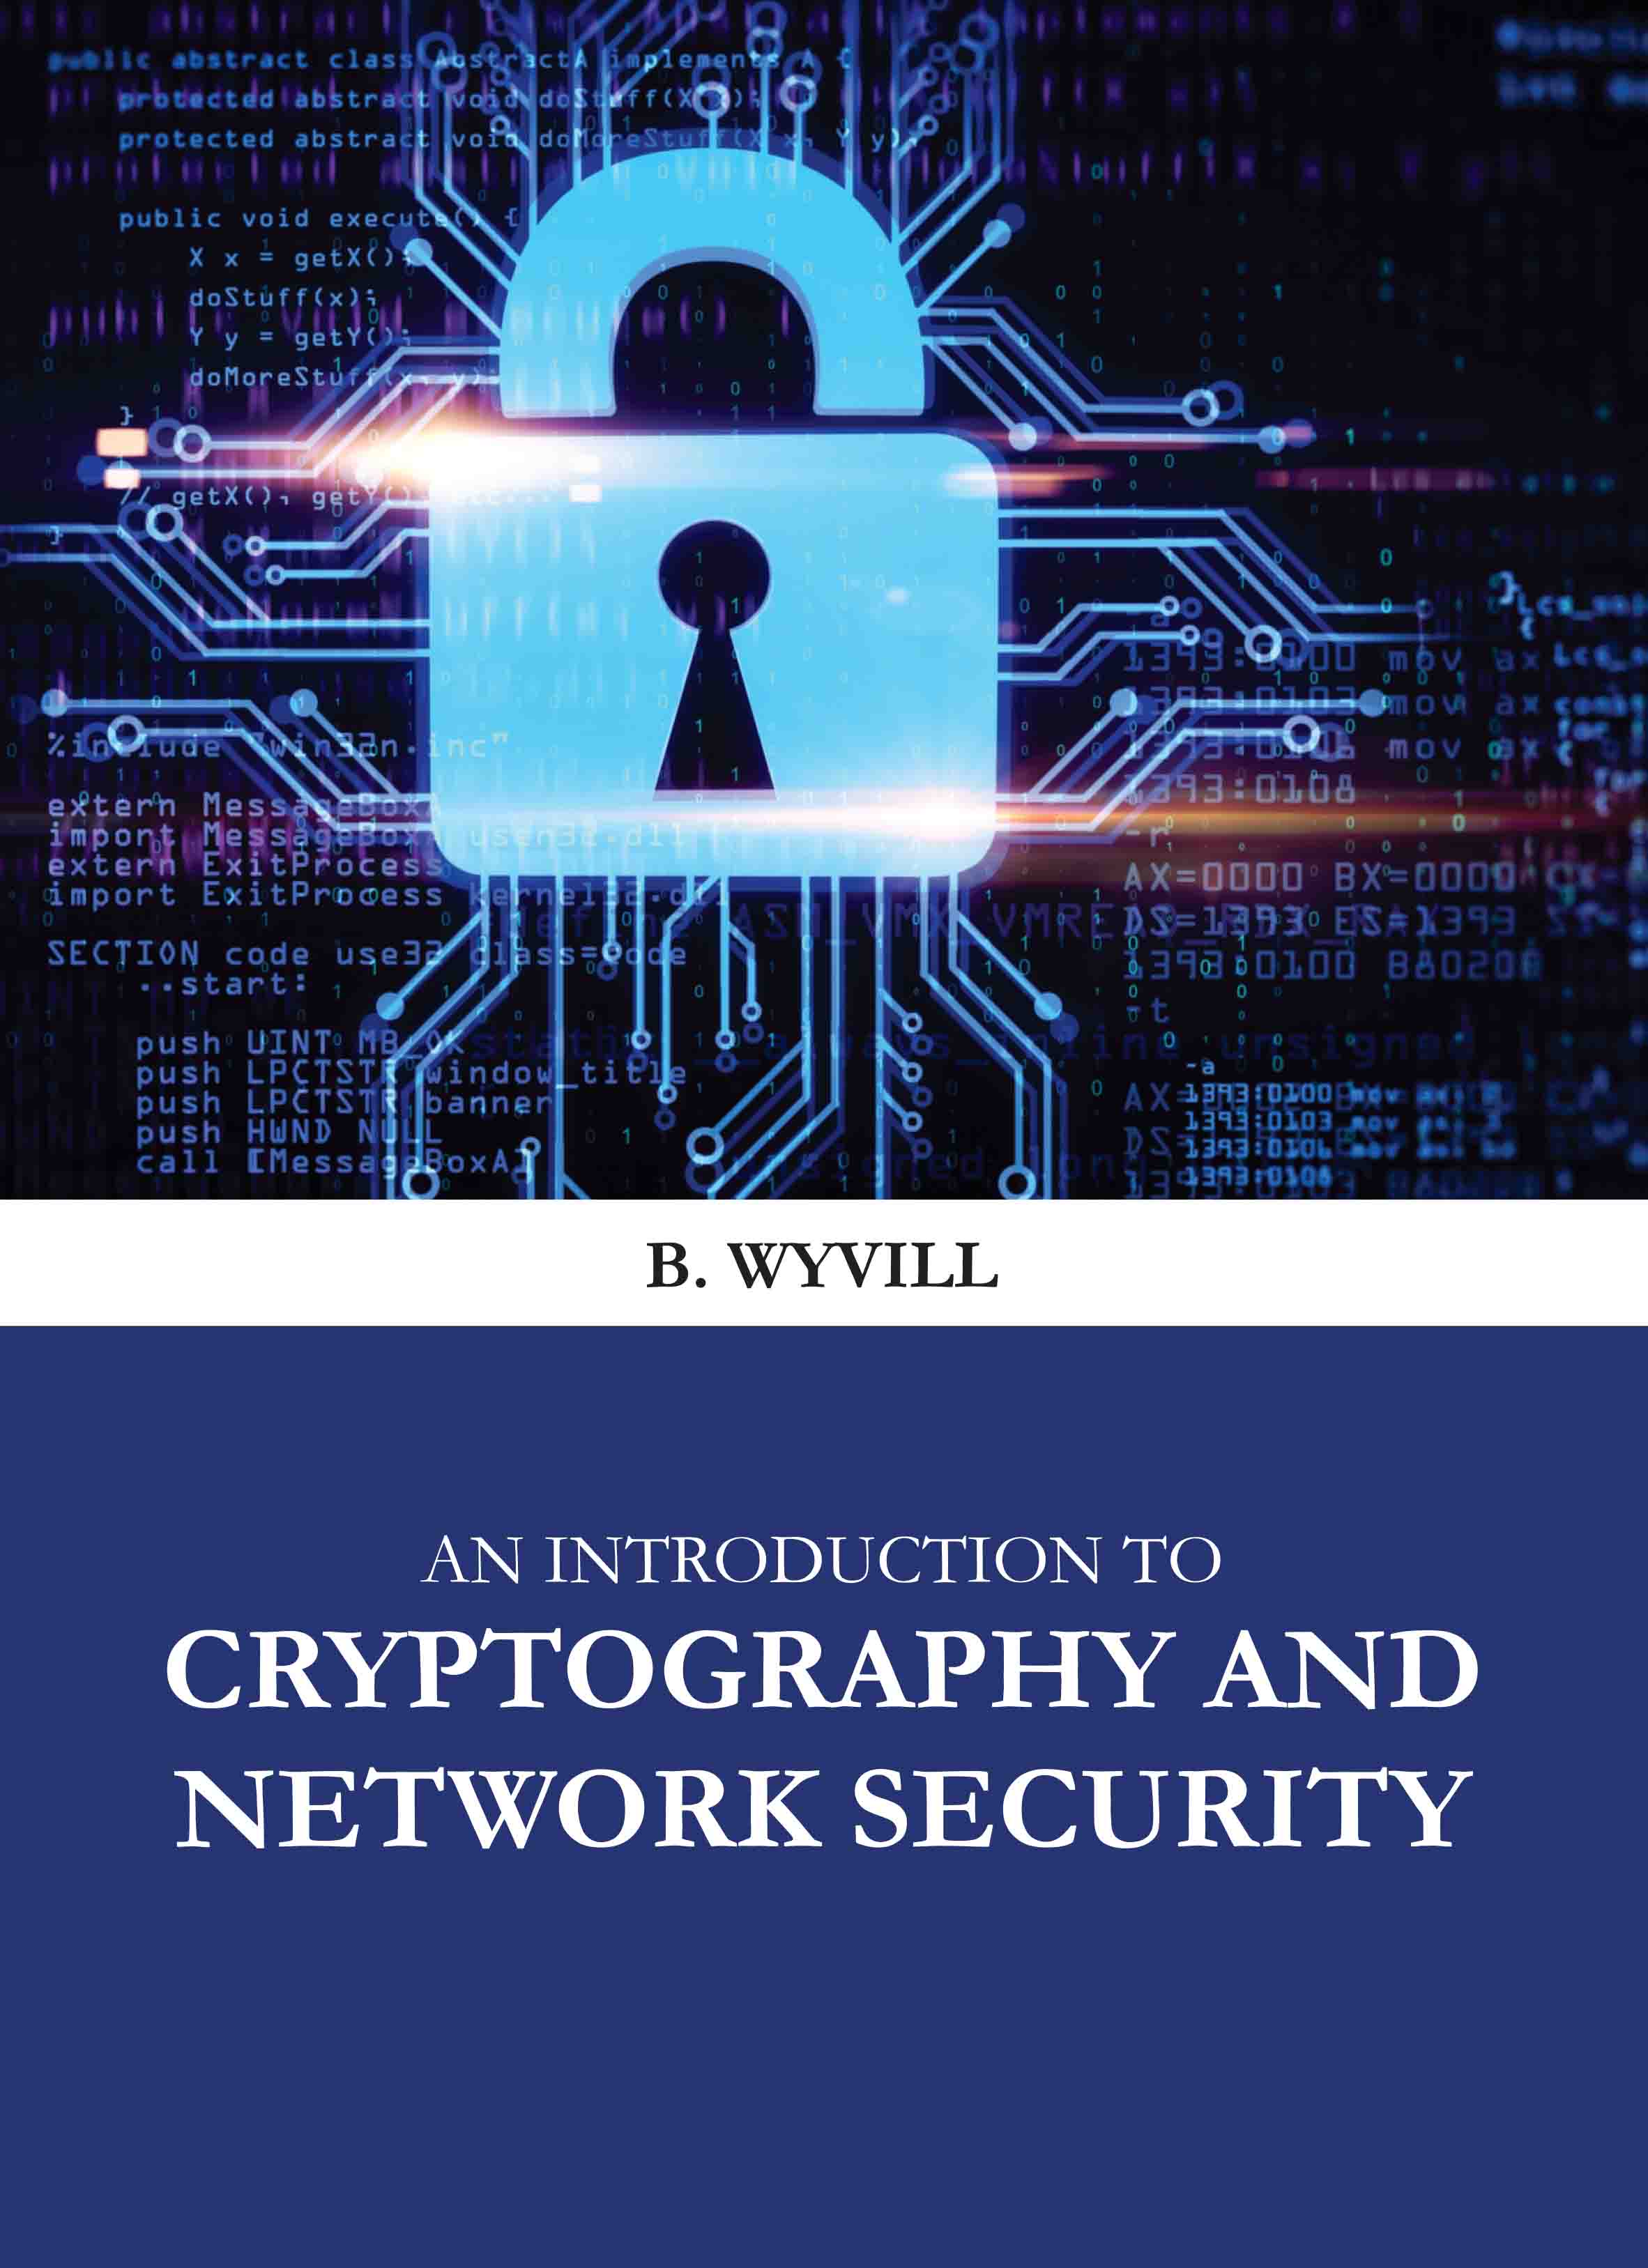 An Introduction to Cryptography and Network Security